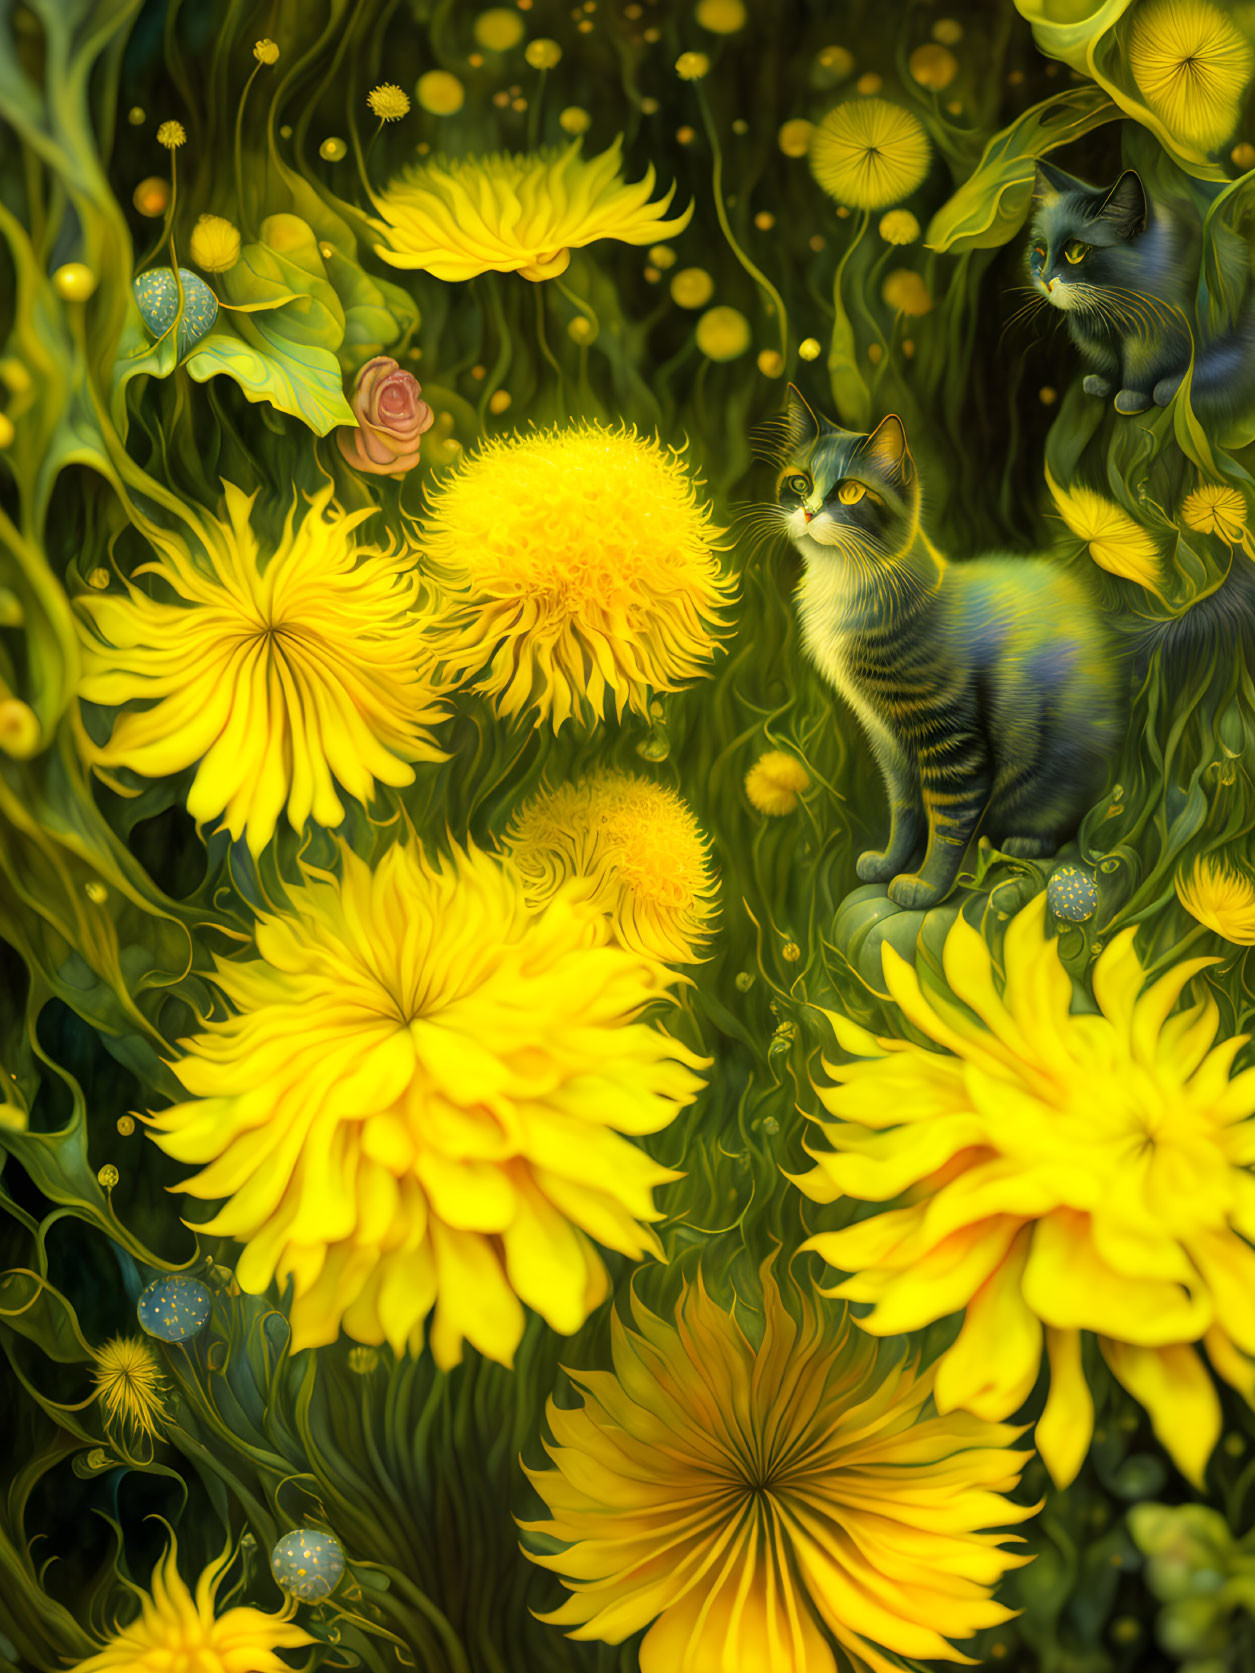 Yellow flowers and two cats in dreamy setting.